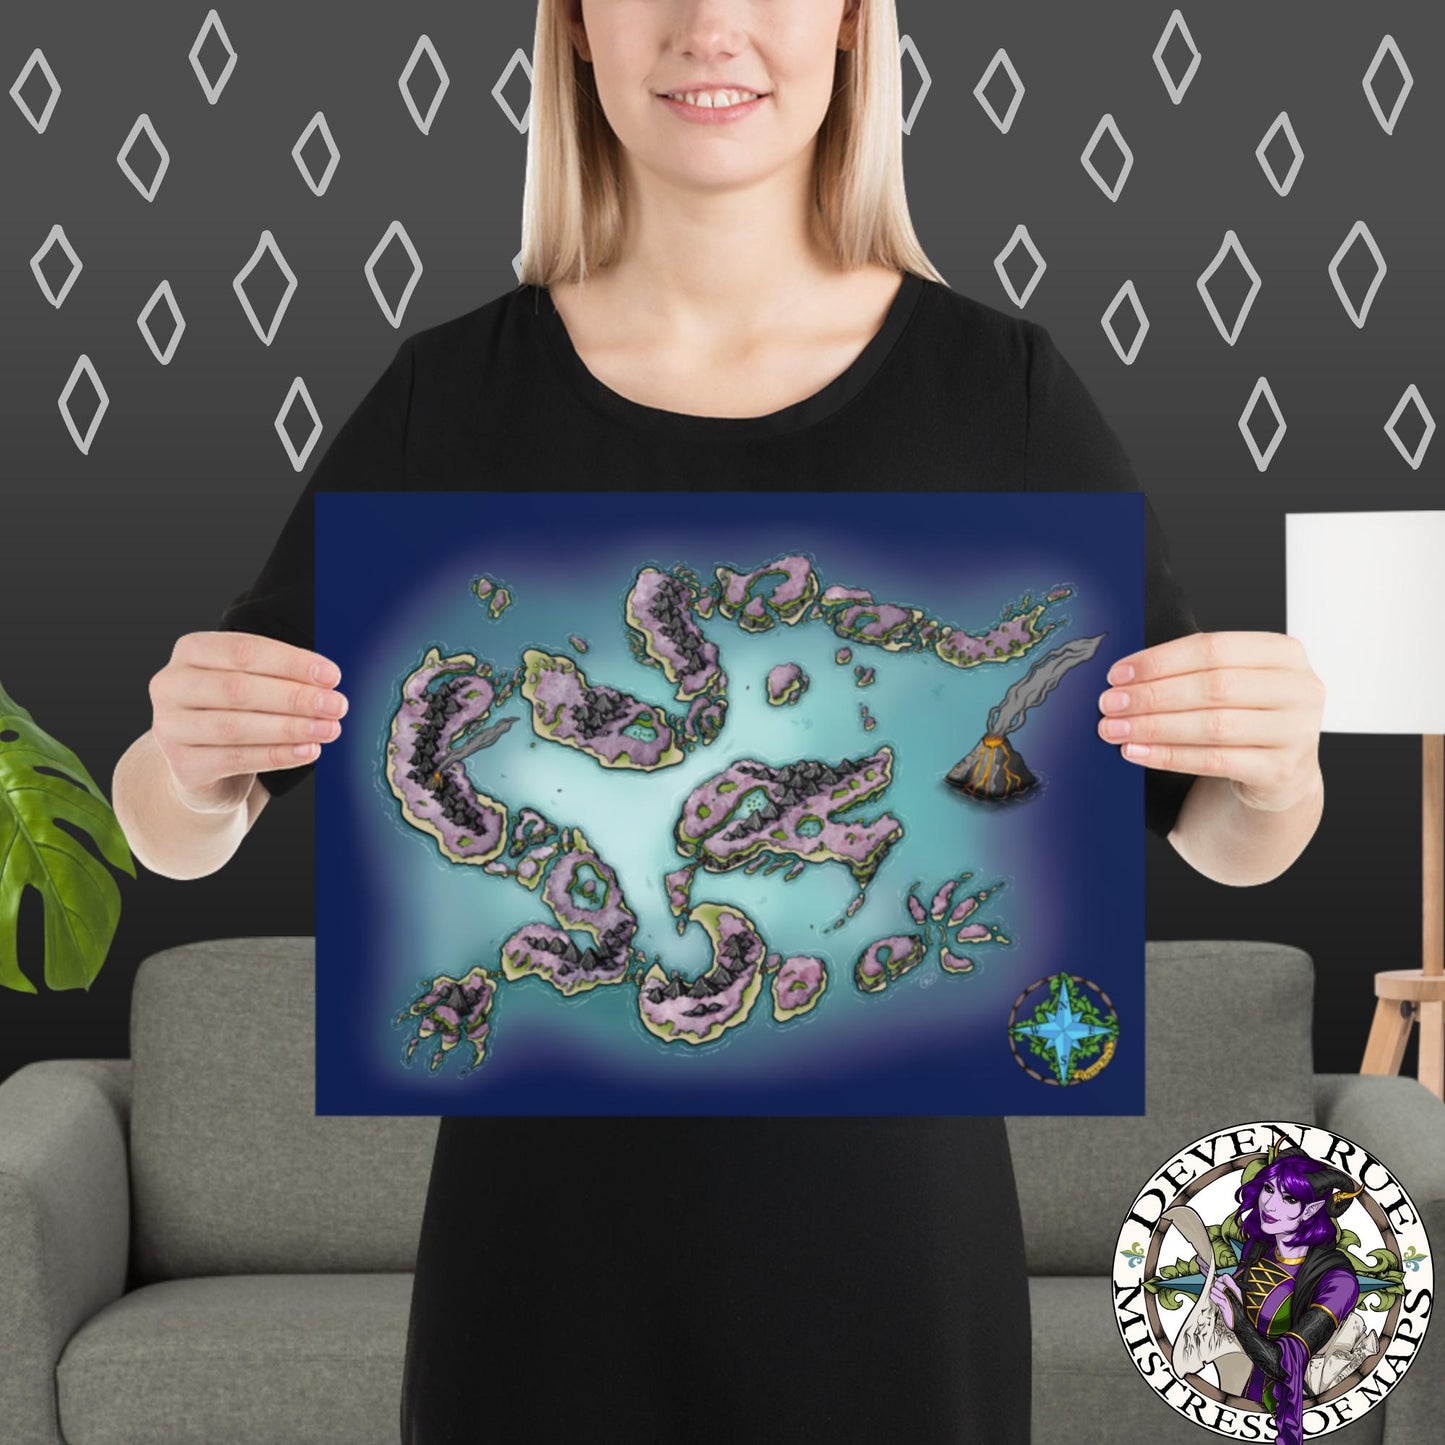 A model holds the colorful Dragon Isles map 12" by 16" poster by Deven Rue.